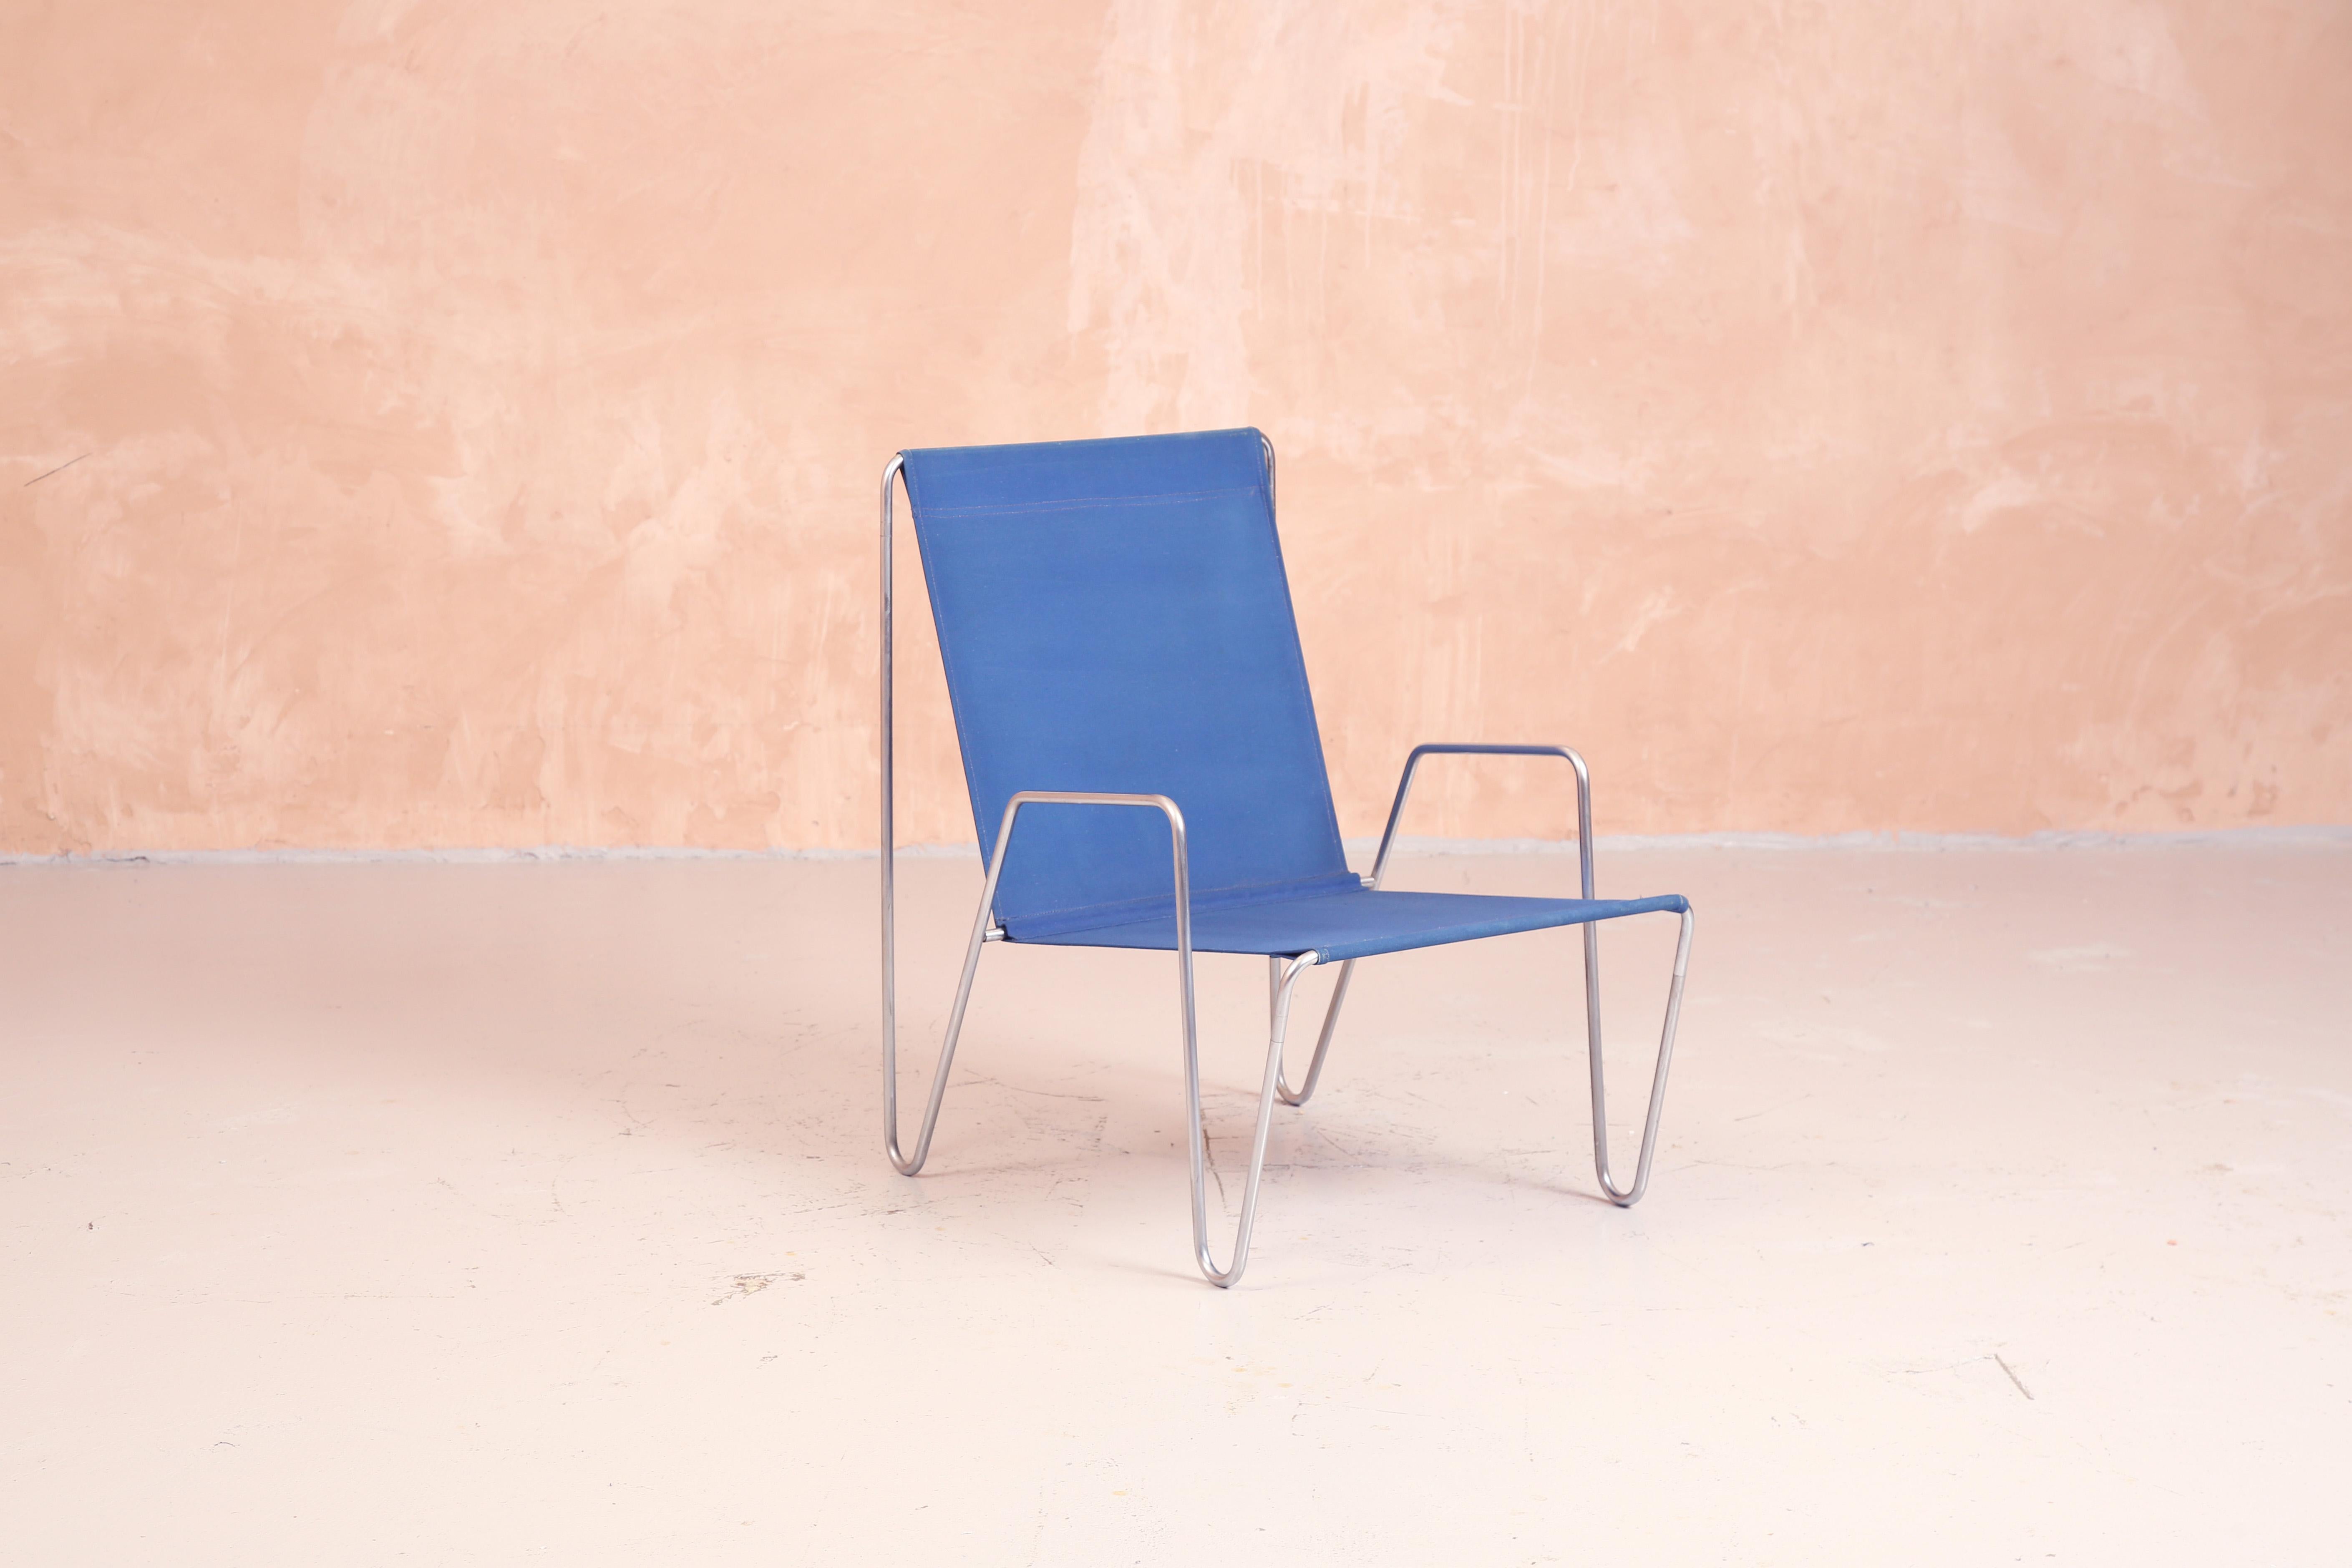 Verner Panton Bachelor Chair with Armrests
Model 3351
Blue Sailcloth and Chromed Steel Tube
Designed 1953, Produced 1955

The design of this chair is based on the bracket chair designed by Gerrit Rietveld in 1927. This is an original Fritz